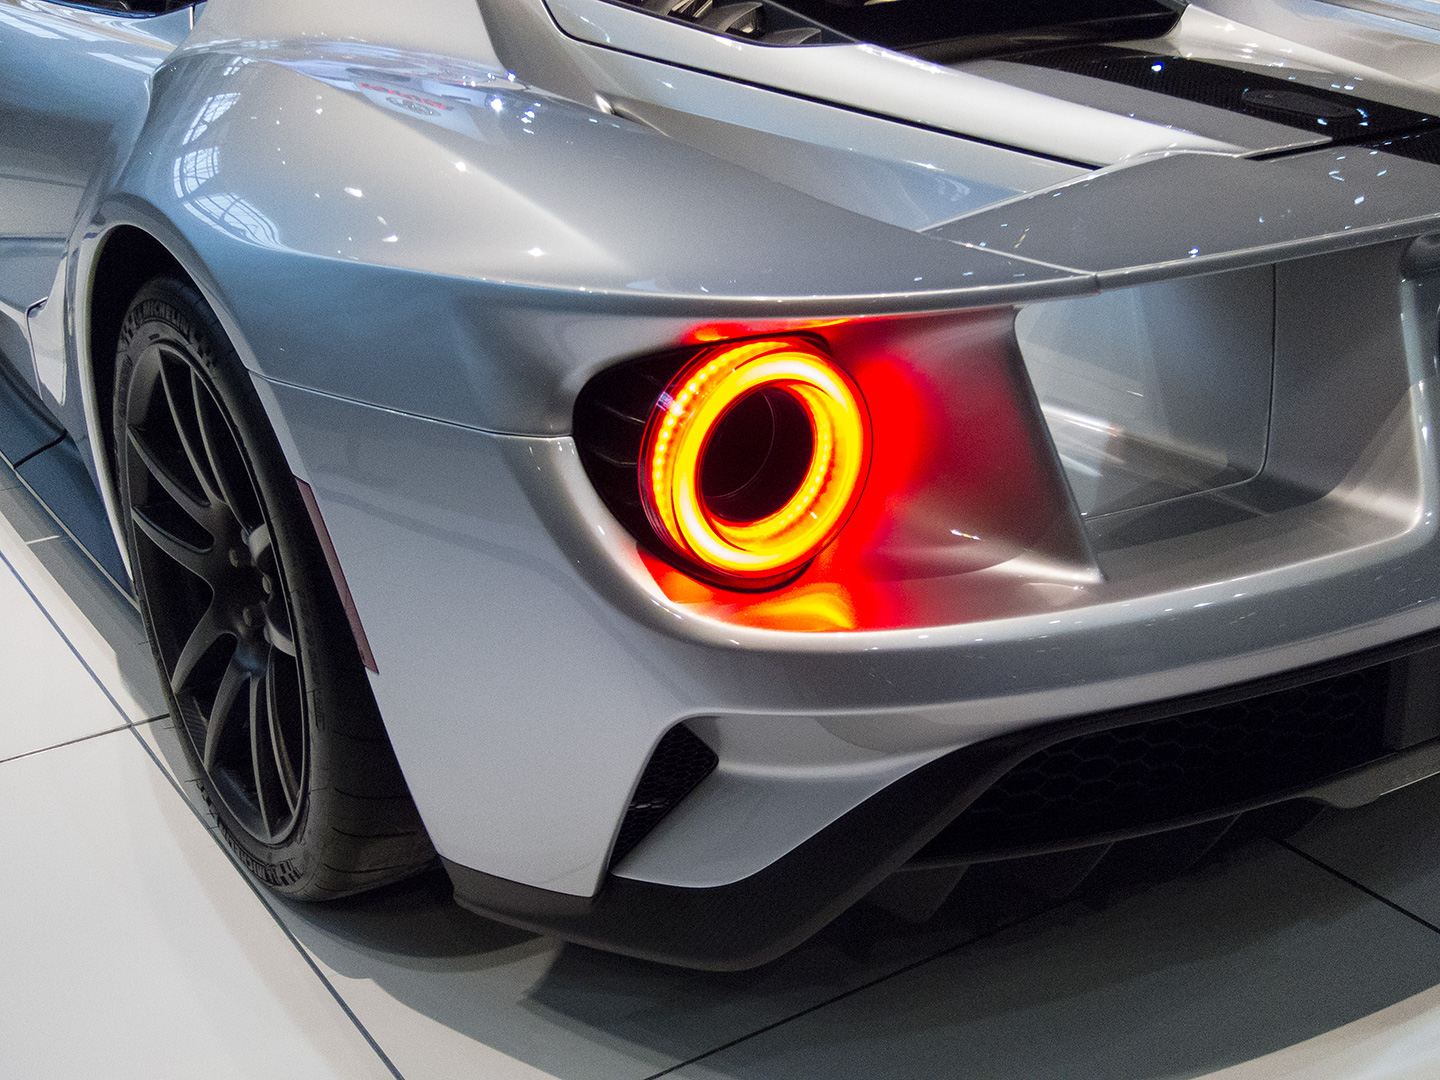 Taillights of a silver Ford GT